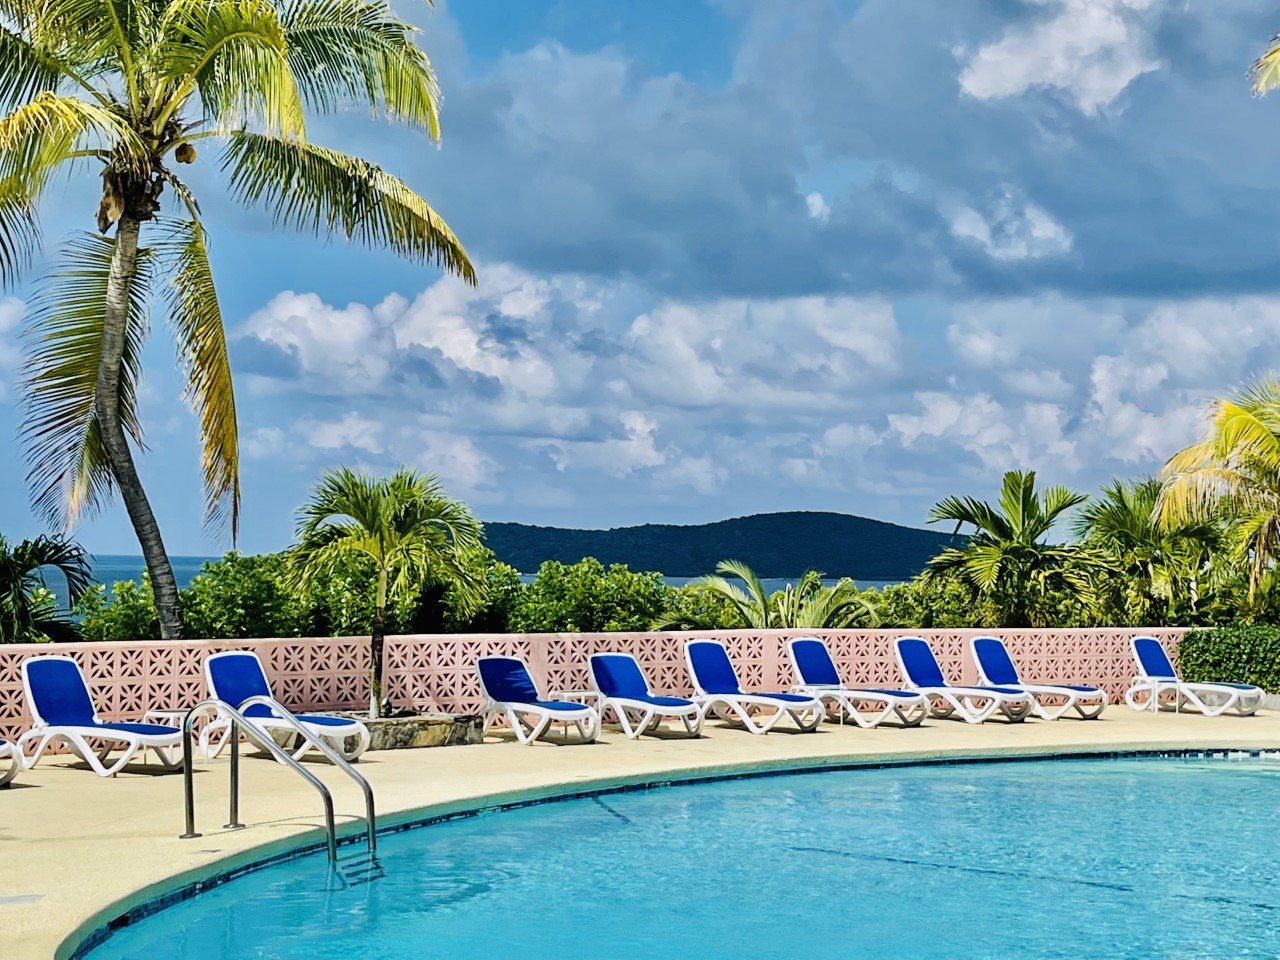 Relax, unwind from every day life and take in the peaceful tranquility views of the Caribbean Sea!